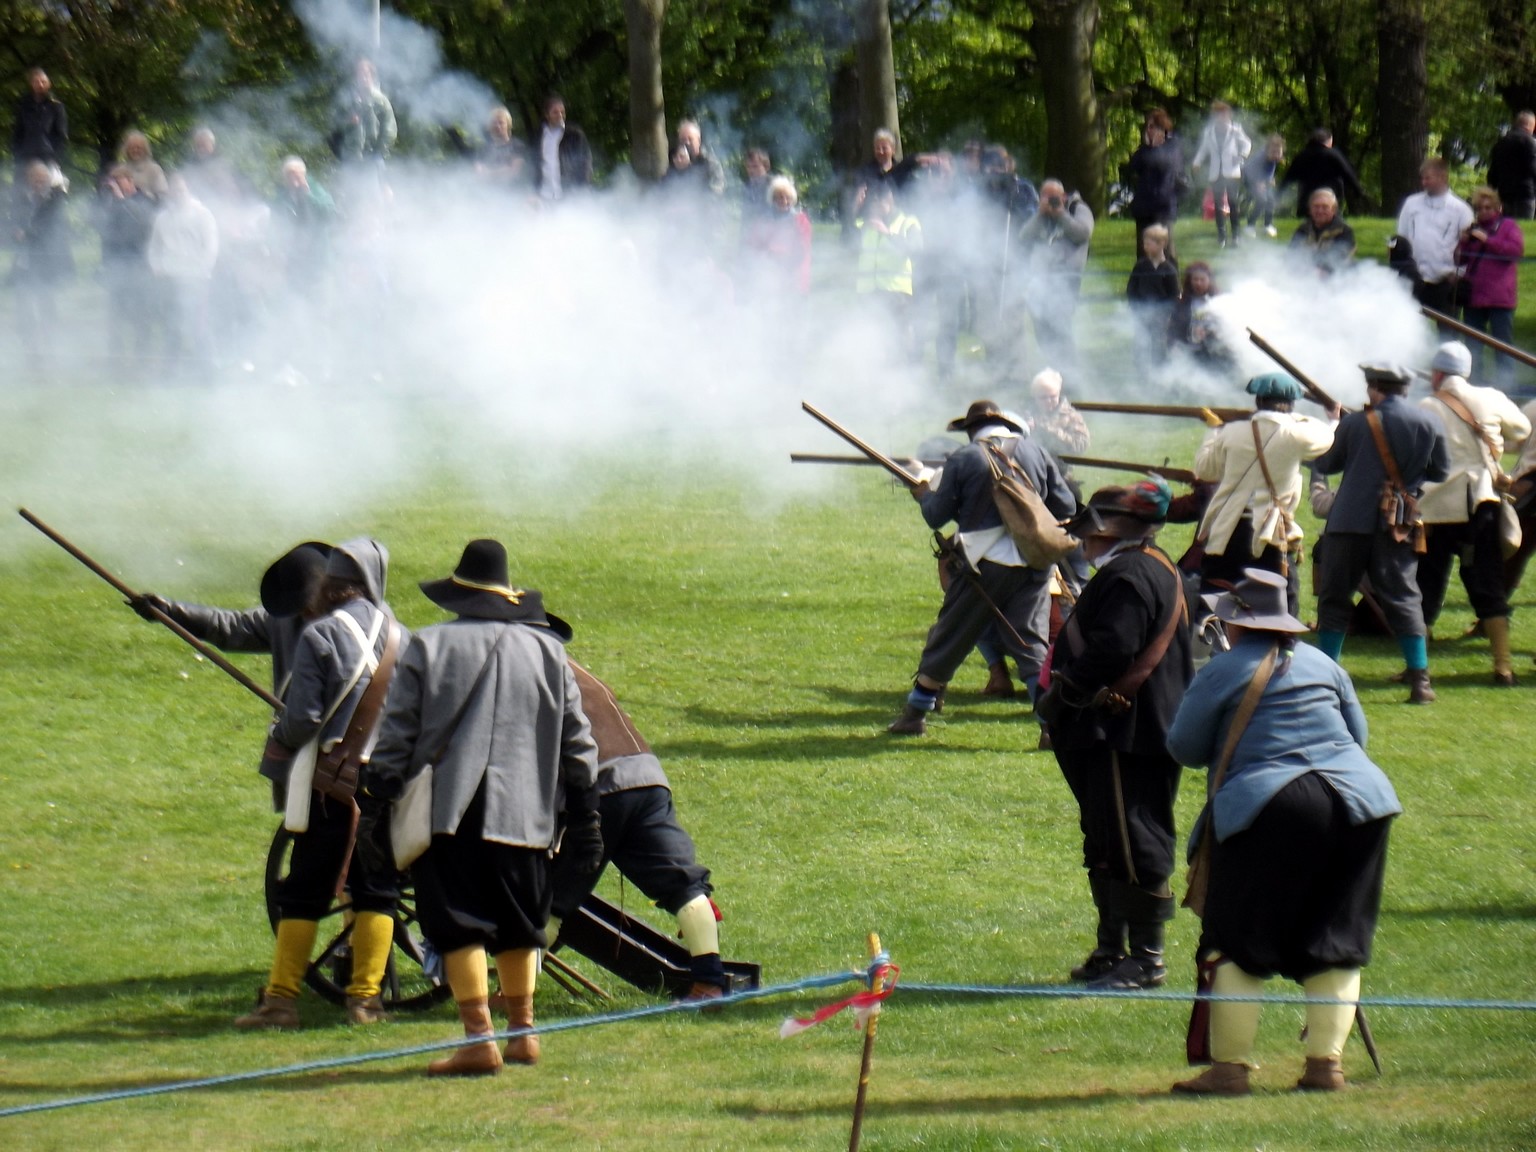 men in renaissance garb are on the ground with spears